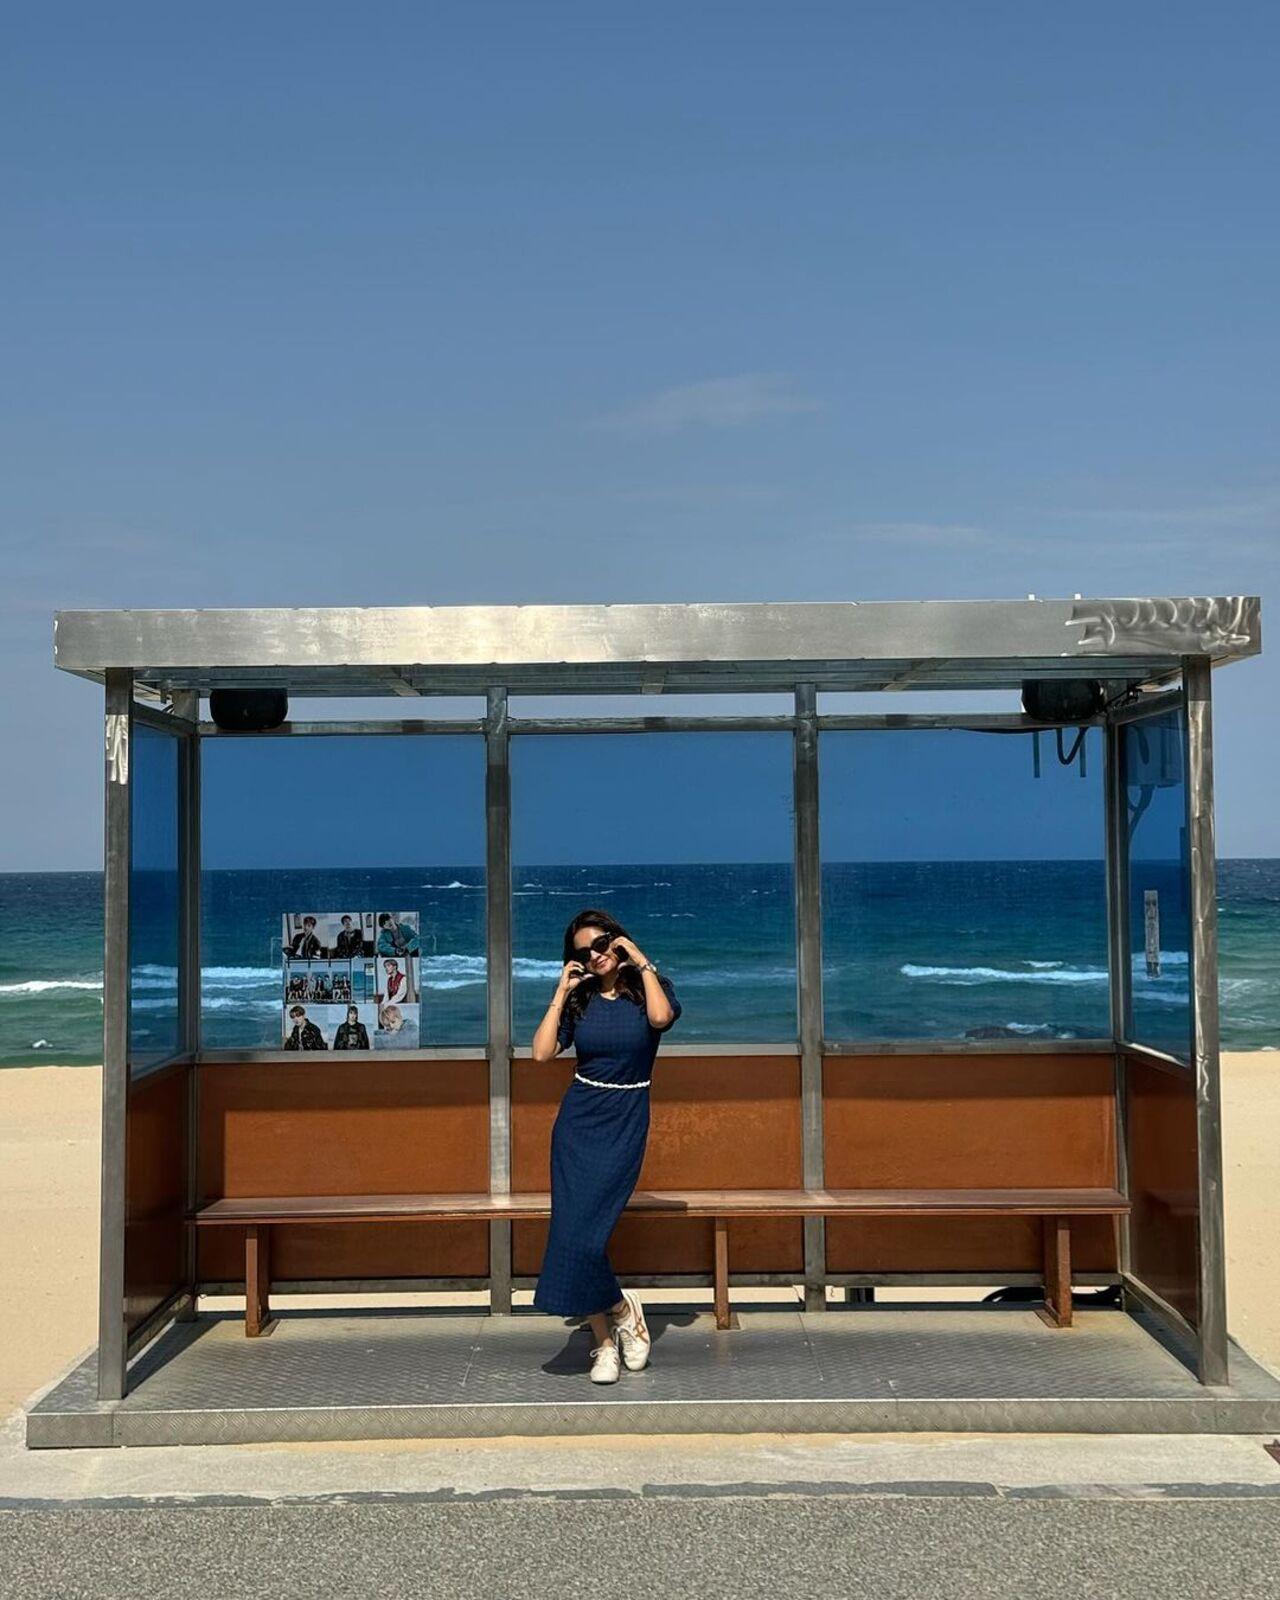 Earlier she also shared a picture from the famous BTS bus stop located at the Jumunjin beach. The spot gained popularity after it featured in the boy band's song 'Spring Day'. 